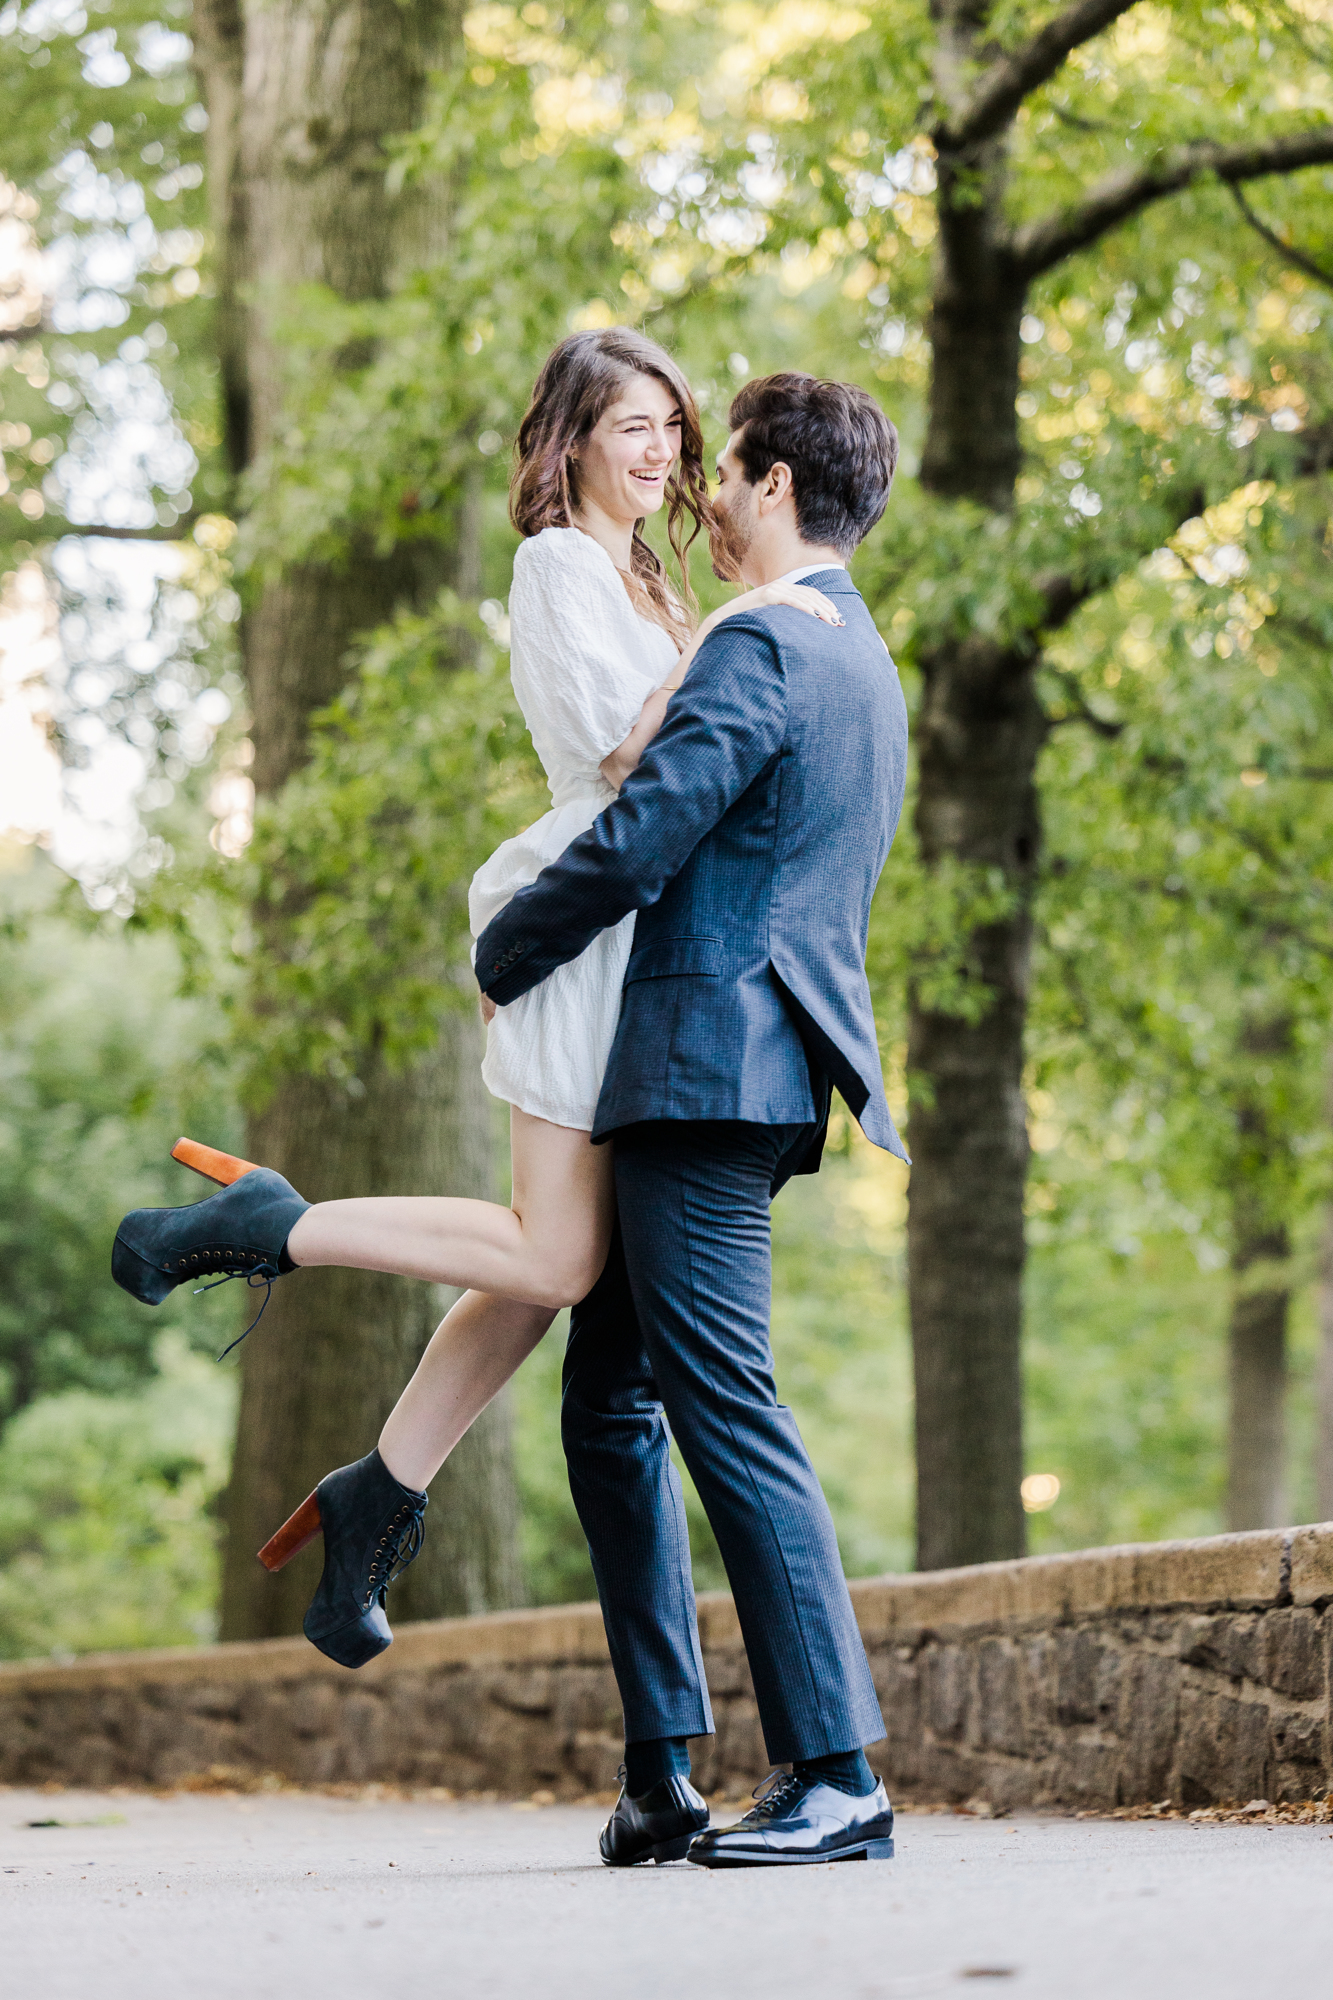 Breathtaking Central Park Engagement Photos in NYC